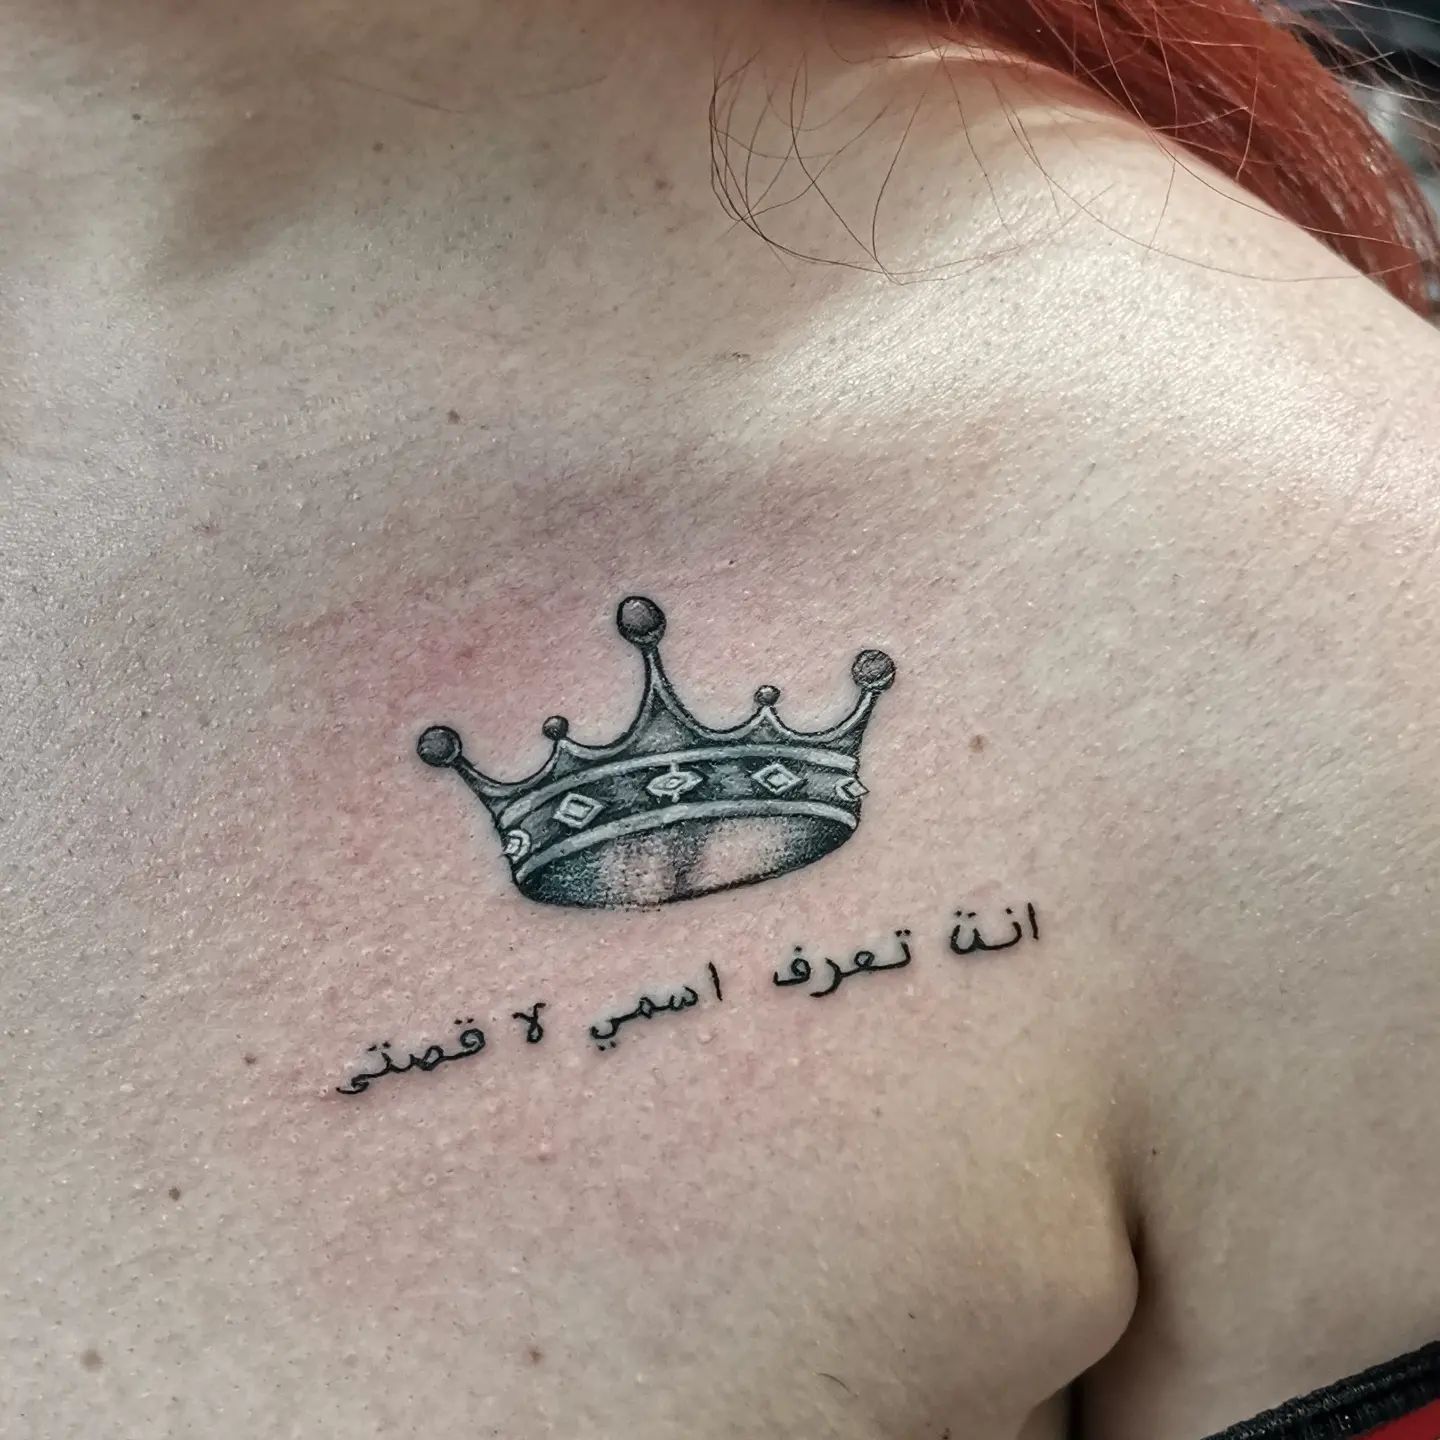 To make yourself experience the queen vibe, getting a crown tattoo may be a nice idea. Arabic lettering below it is a nice detail, too.